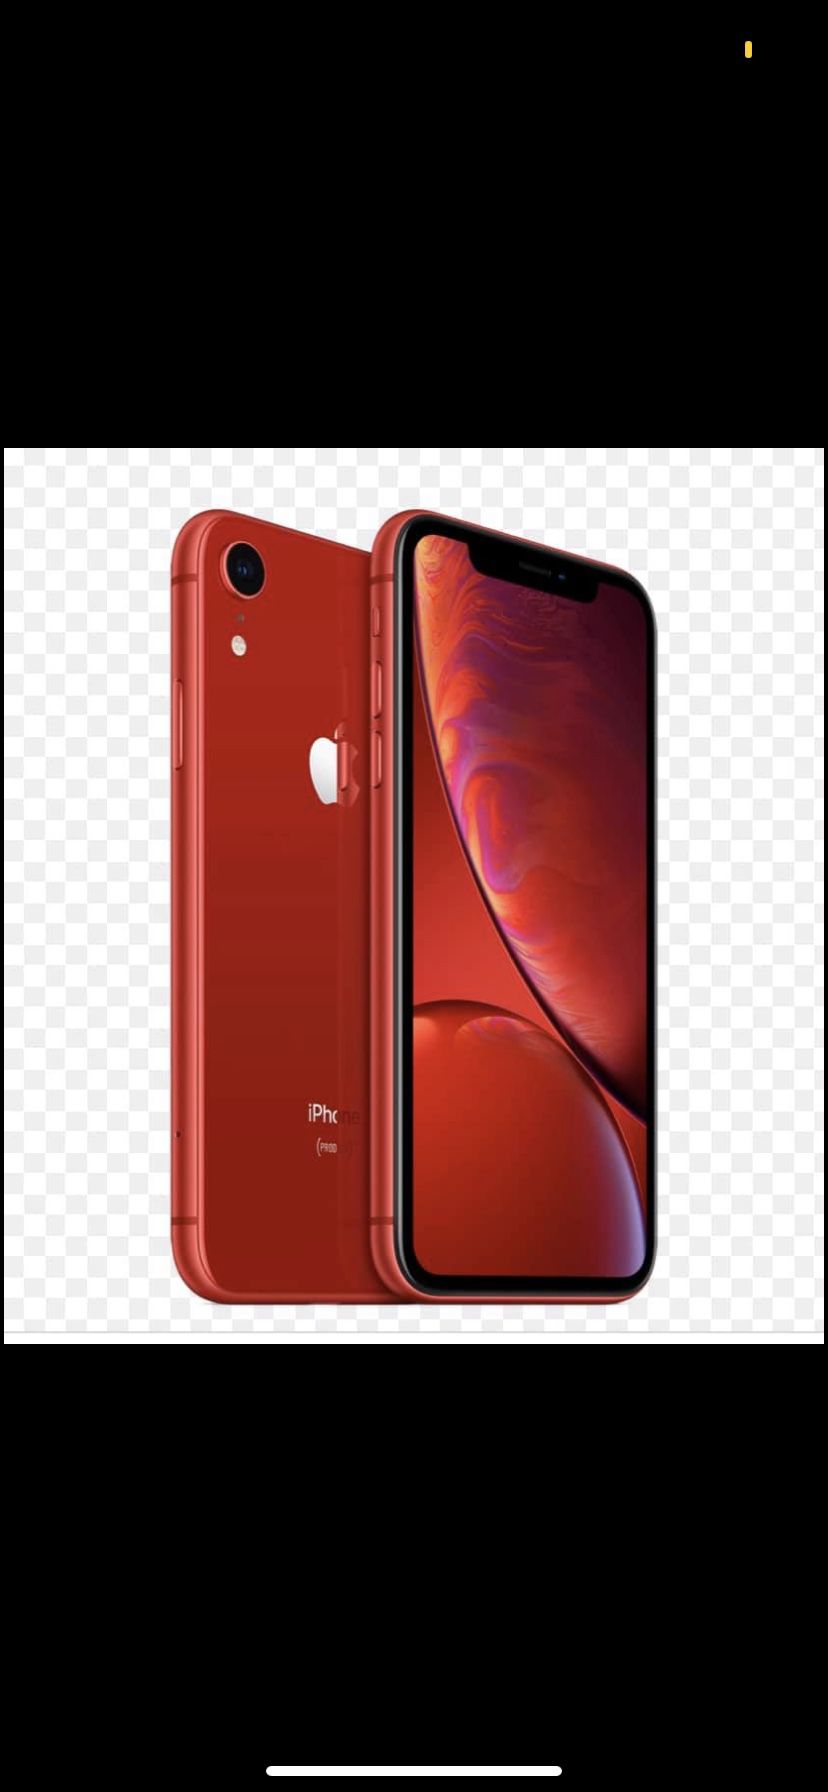 T Mobil 64 gb red XR